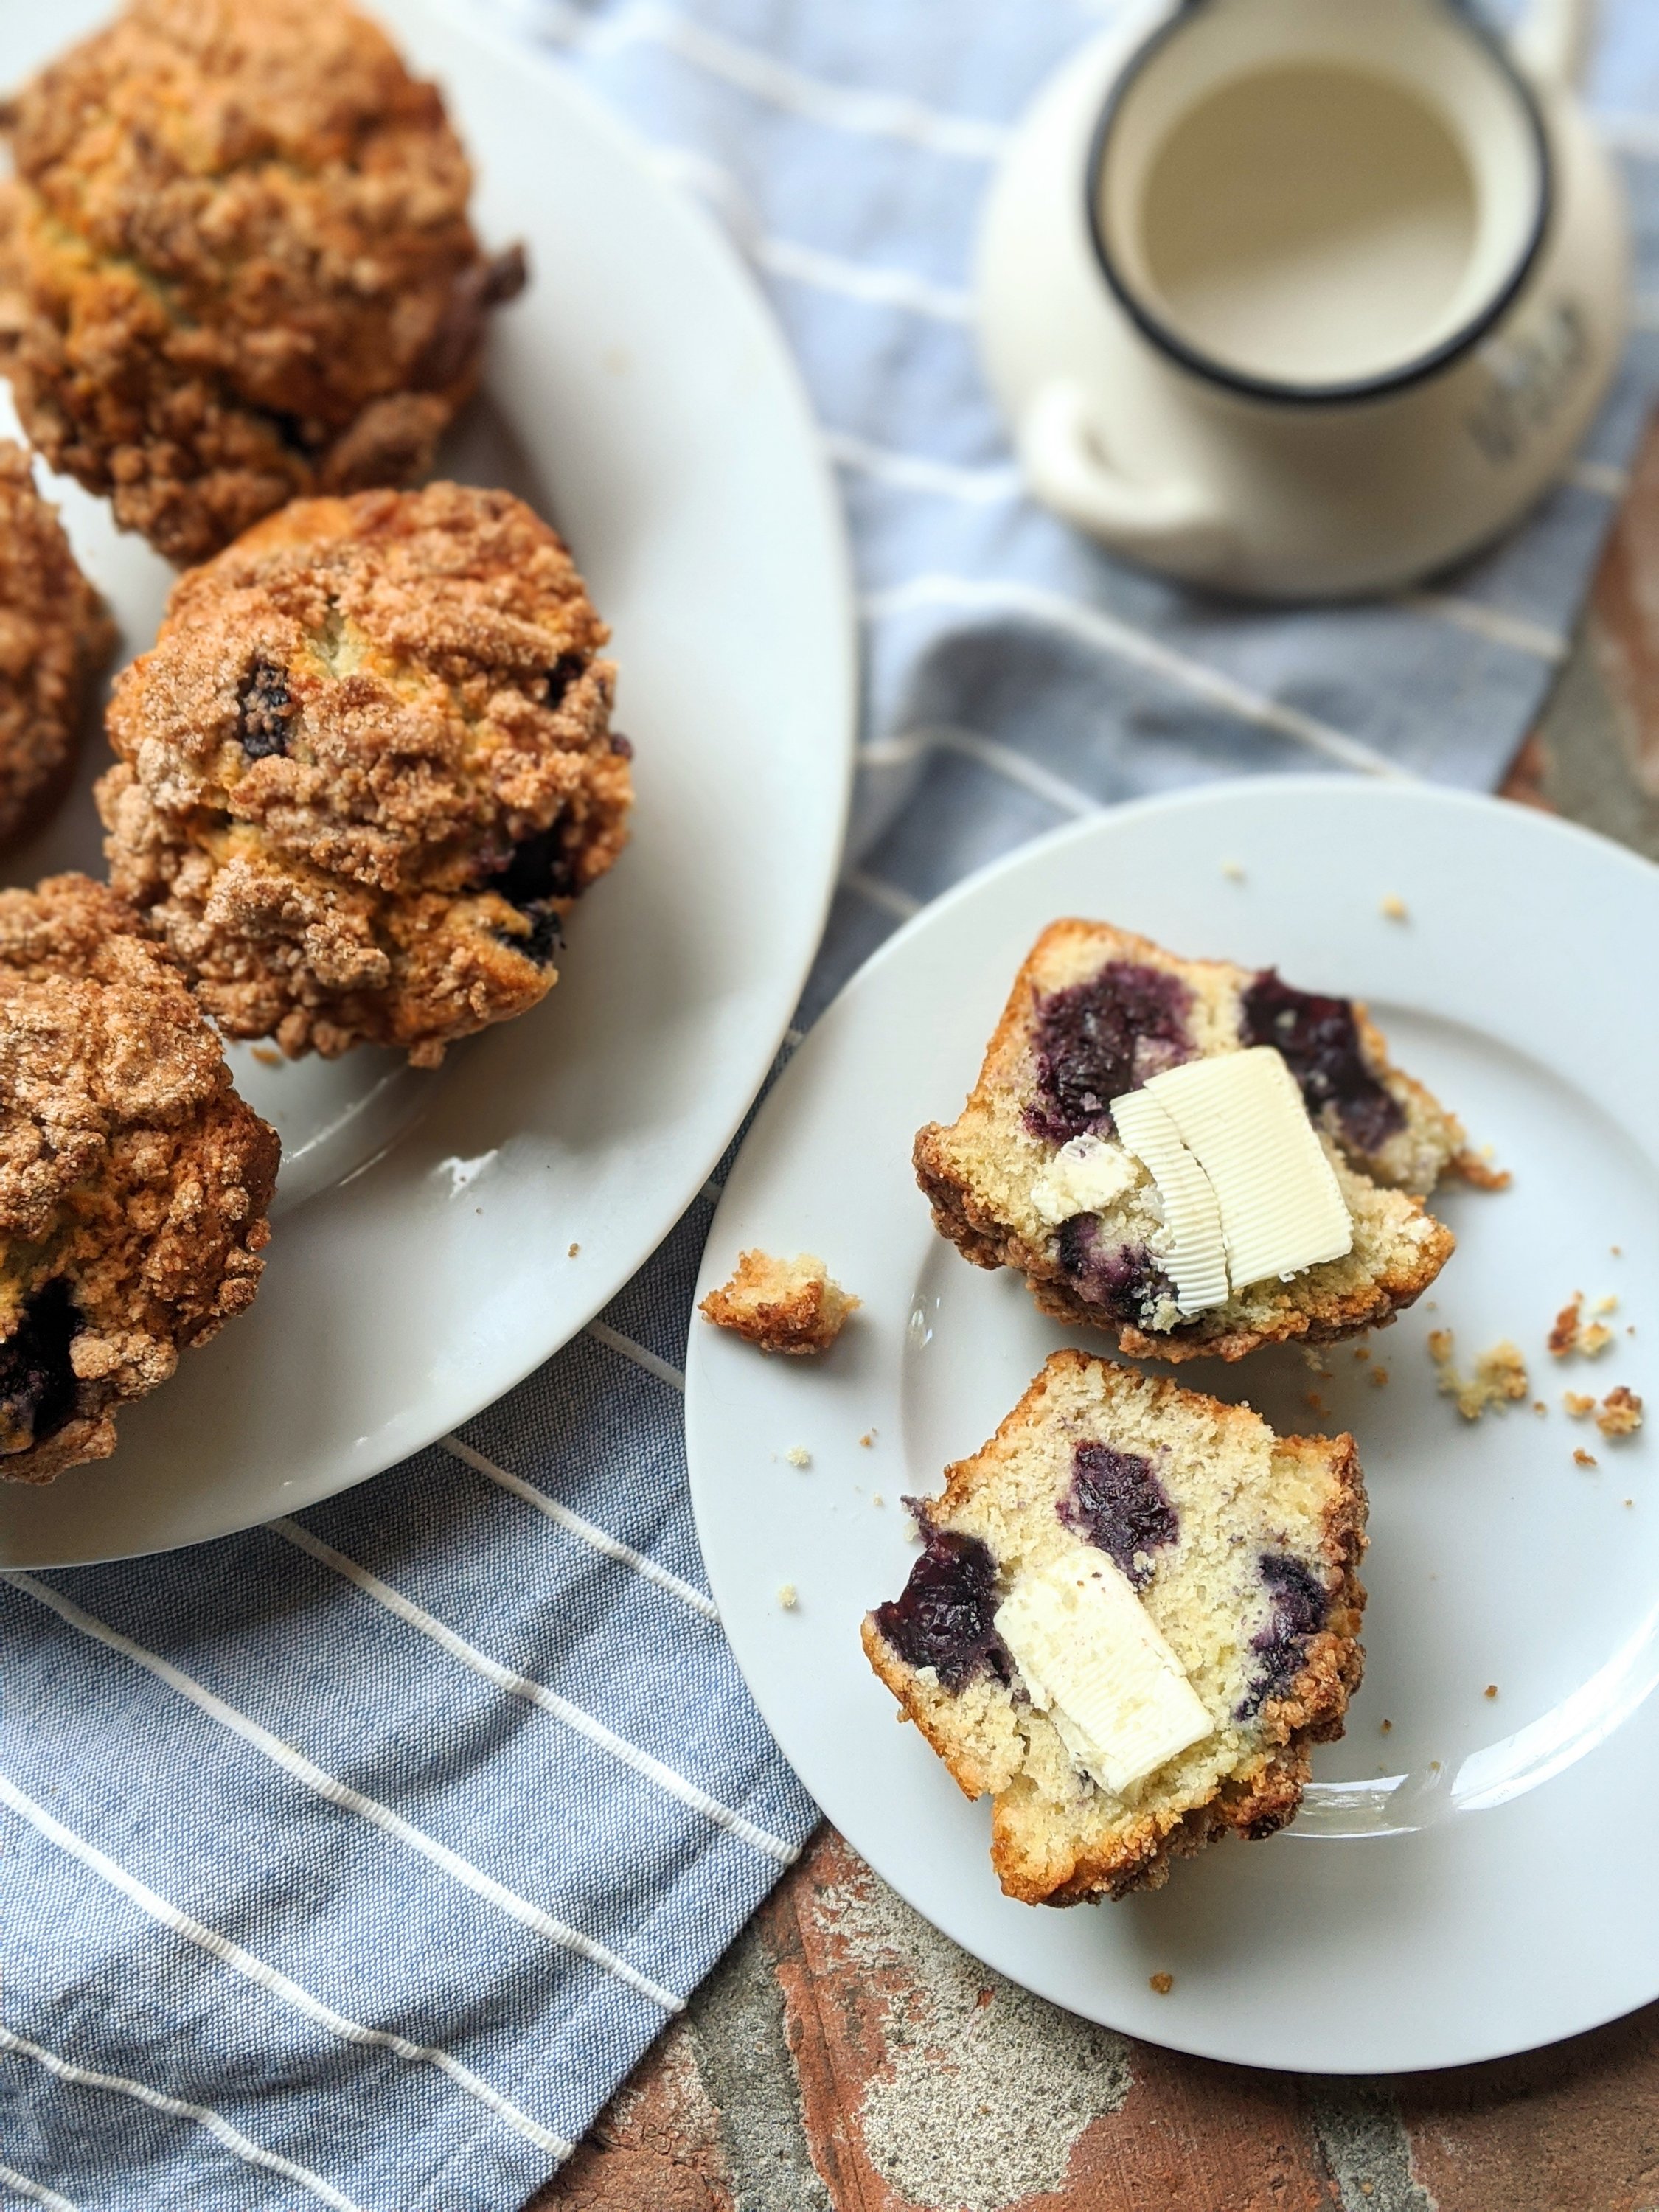 blueberry muffins with butter recipe healthy fresh sweet berry muffins with wild berries wild blueberries homemade best muffin crumble recipe breakfast or brunch